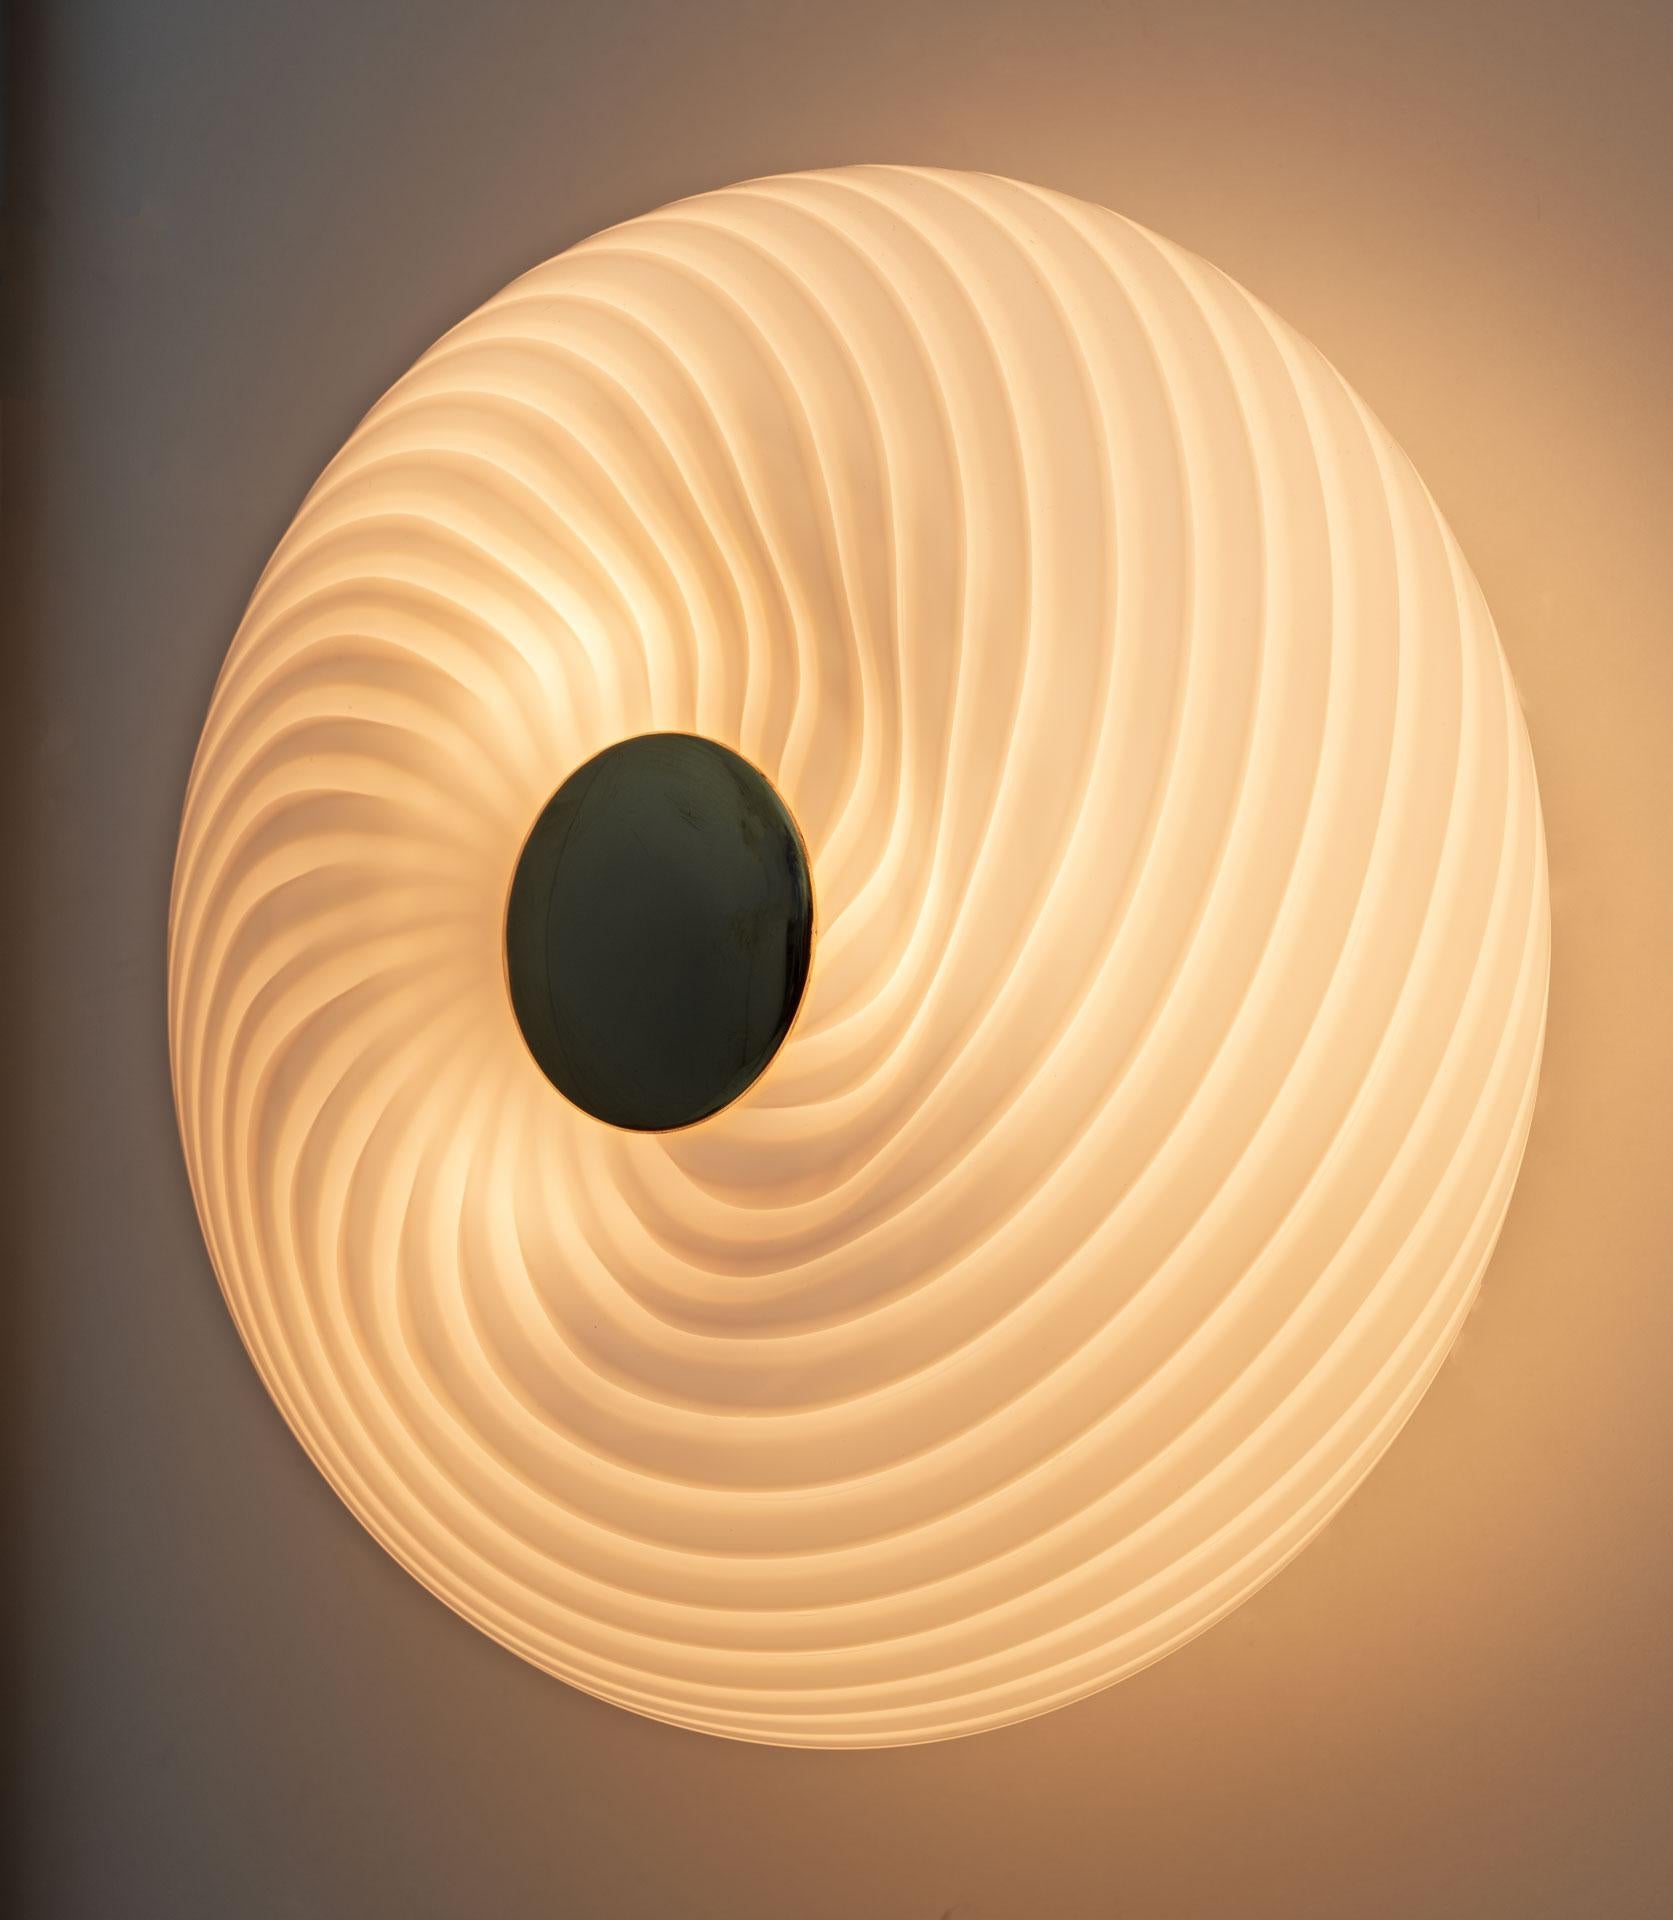 The unusual Murano glass spiral lamp, model 048 by Leucos, was made in Italy in the seventies. It can be used as a ceiling, table or wall lamp.

Founded in 1962 in Scorzè, on the outskirts of Venice, and subsequently moved to the Salzano district,